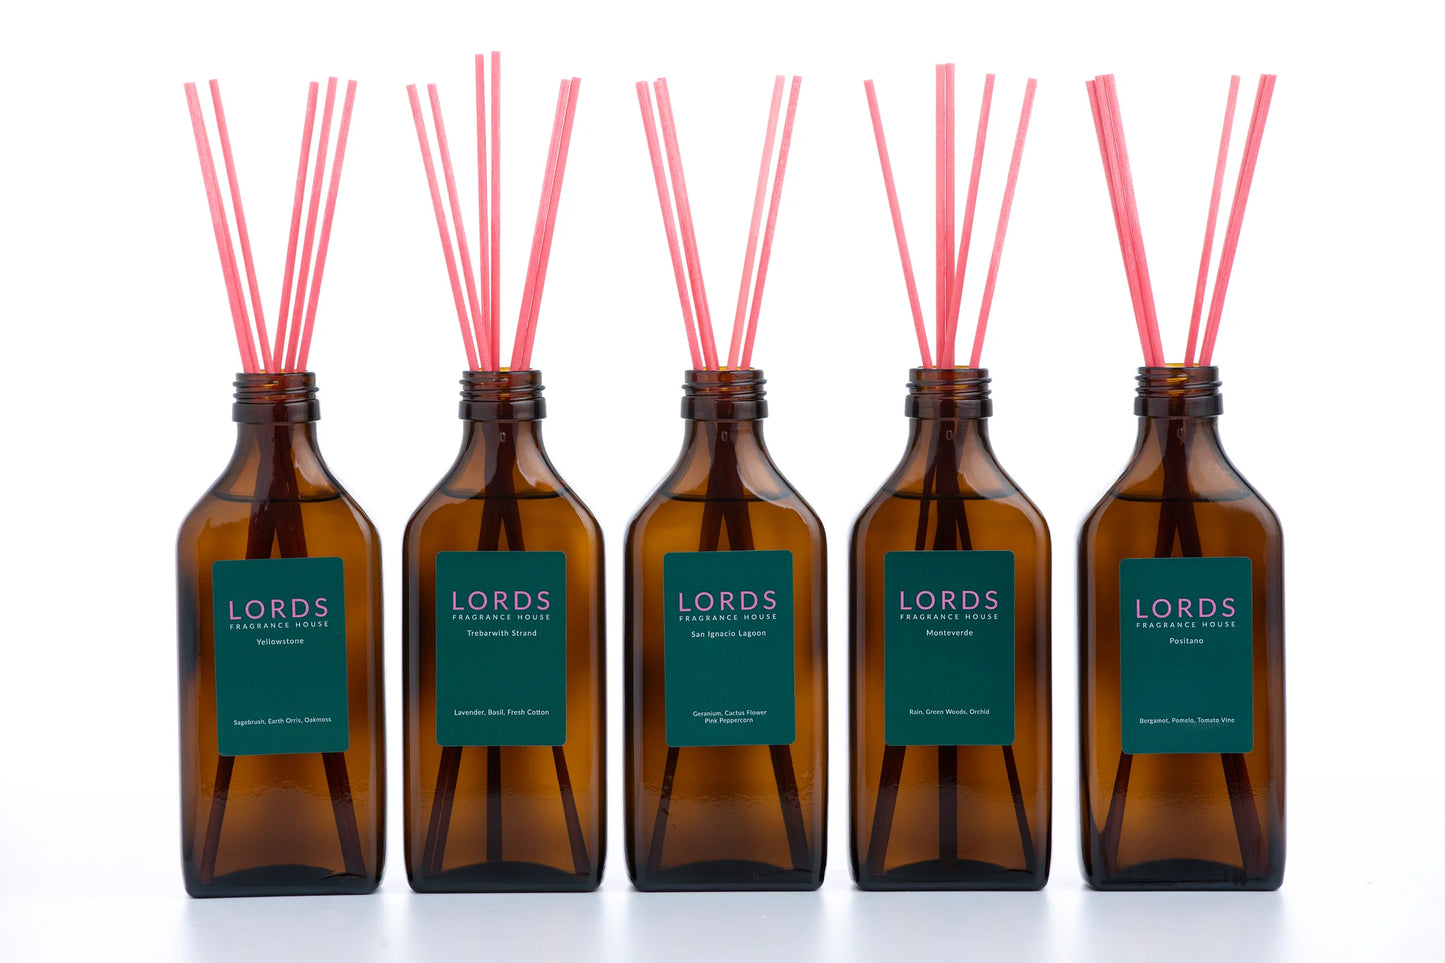 Lords 200ml reed diffusers in a choice of 5 scents